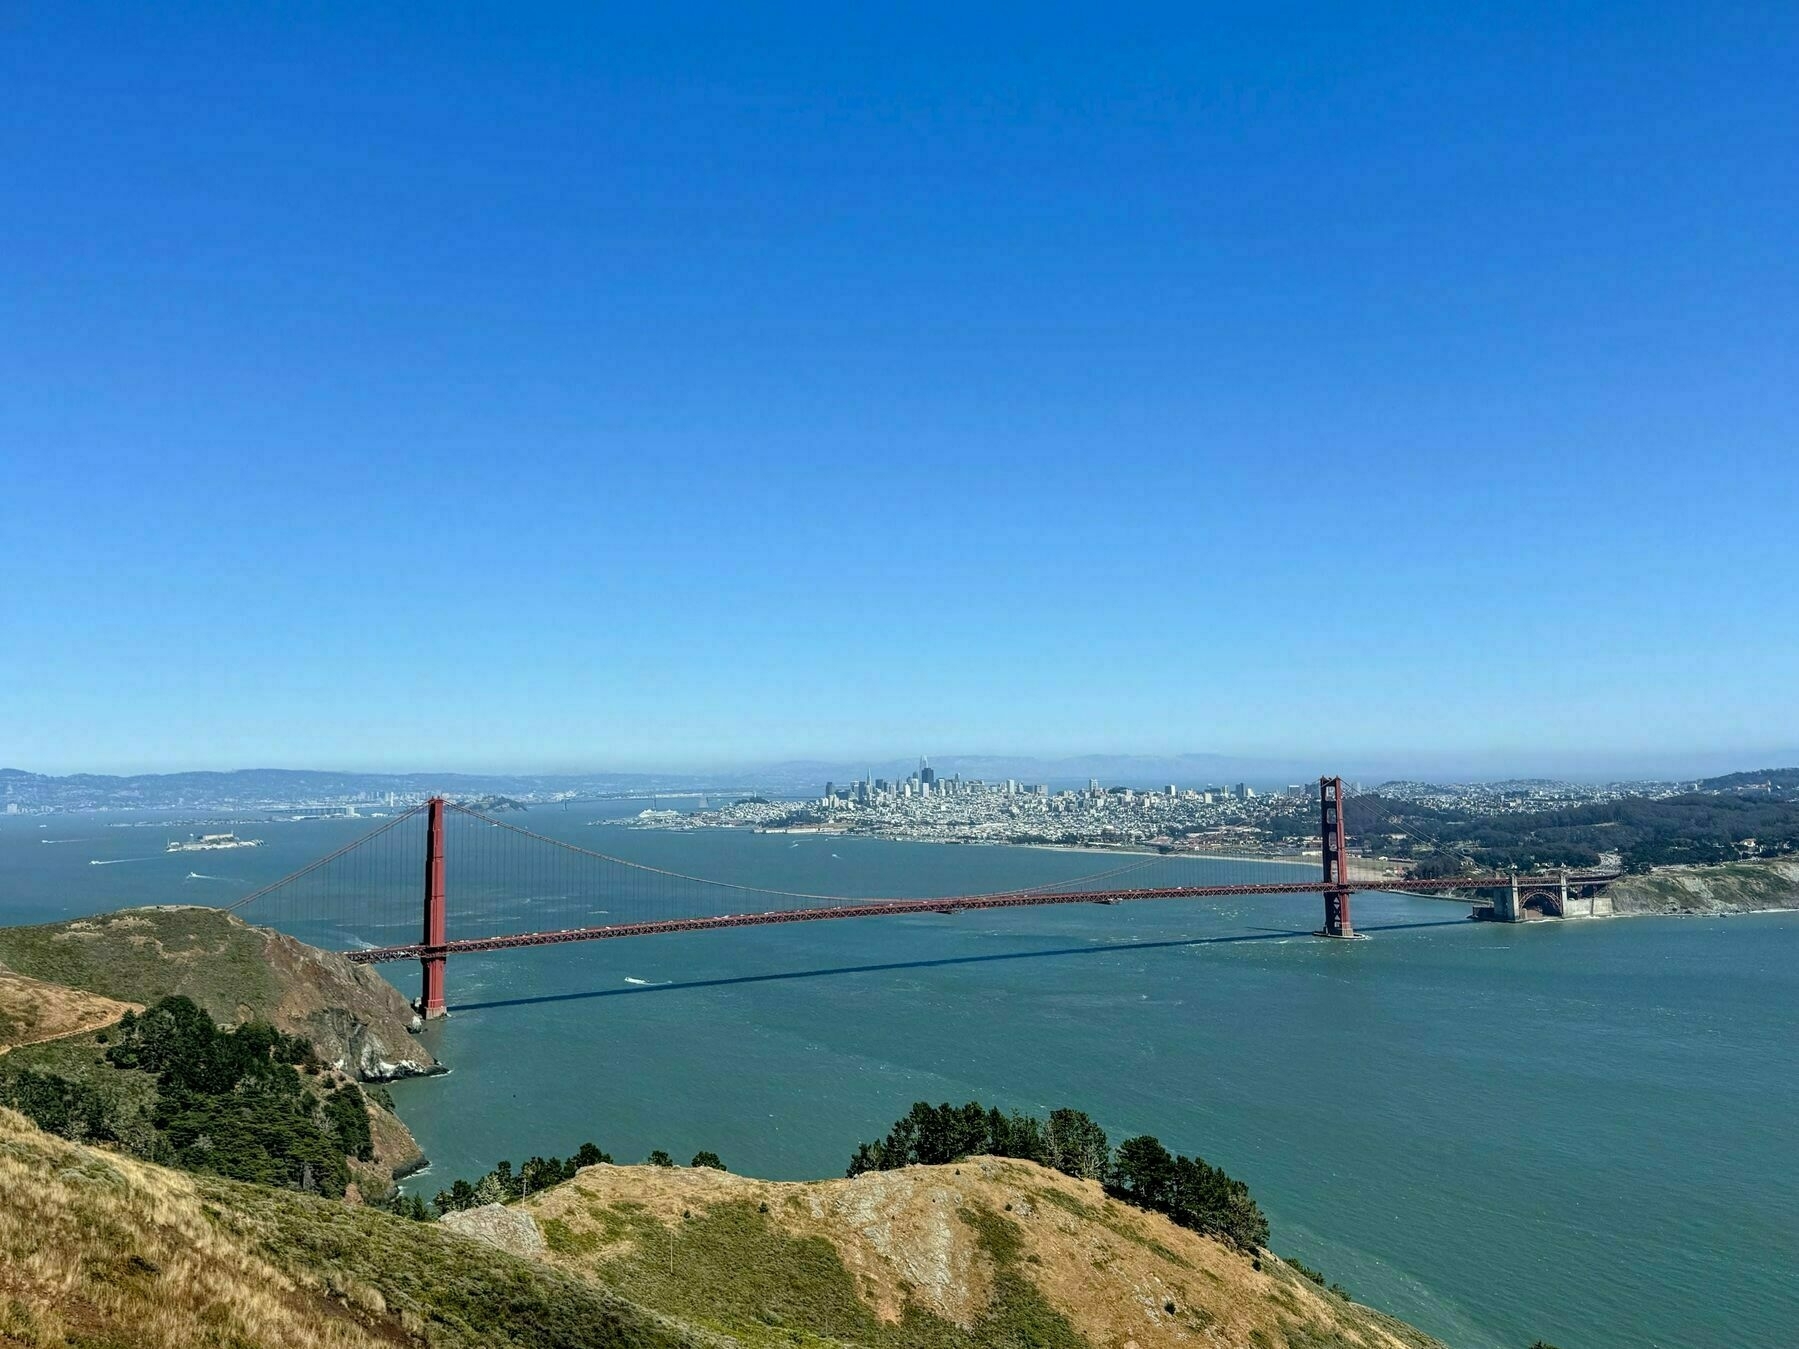 View of San Francisco from Marin Headlands. Golden Gate Bridge in foreground